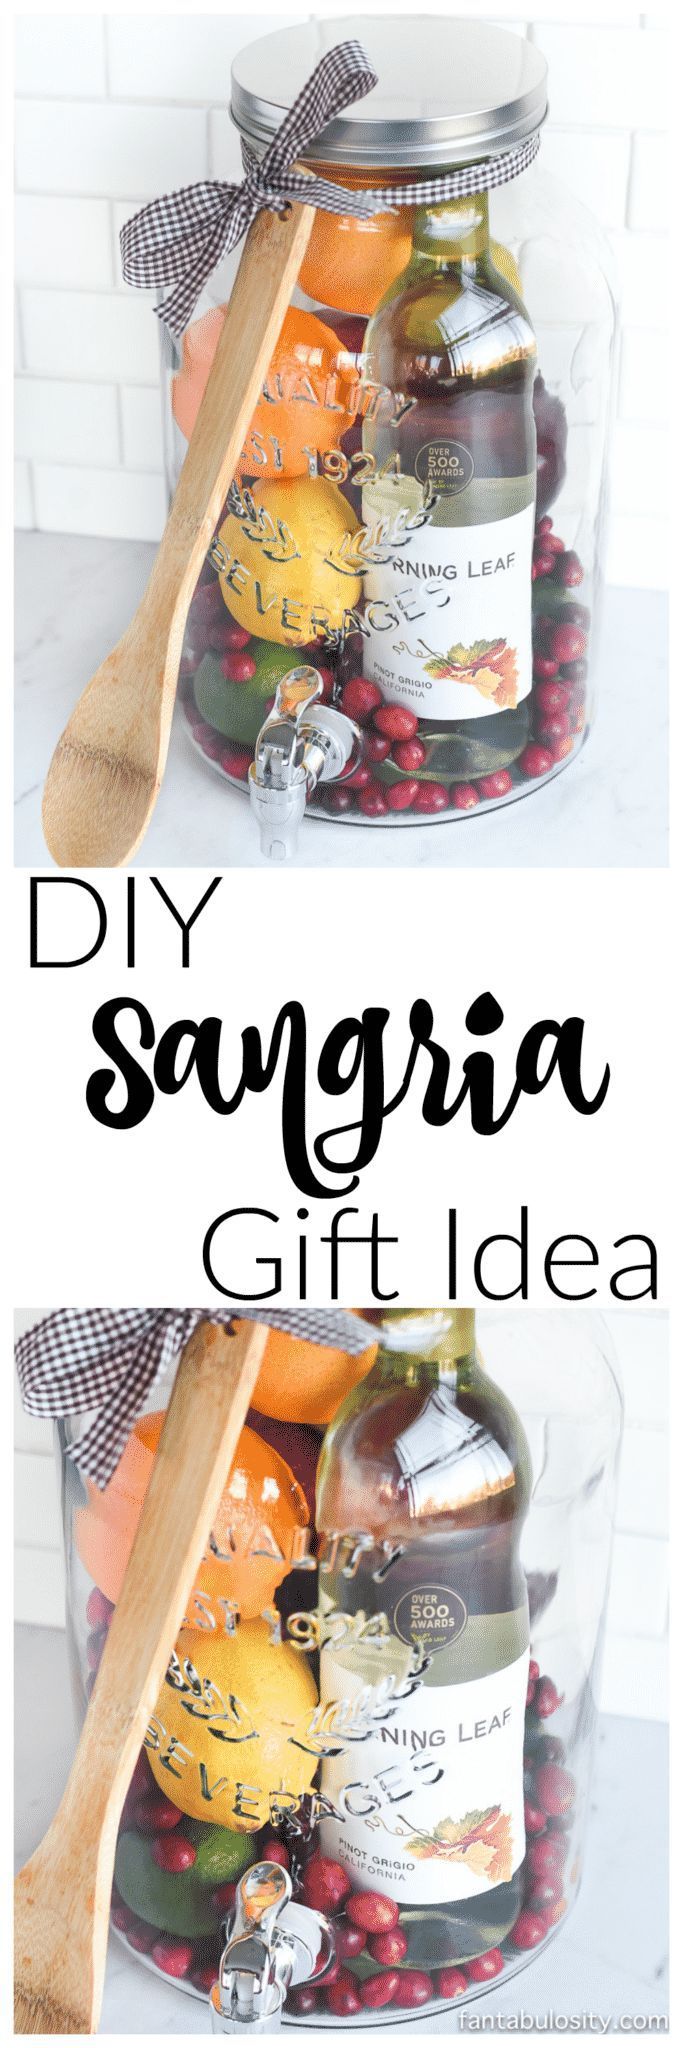 DIY Gift Idea: Sangria Kit - Great for Friends, Housewarming  More! -   diy Gifts for friends